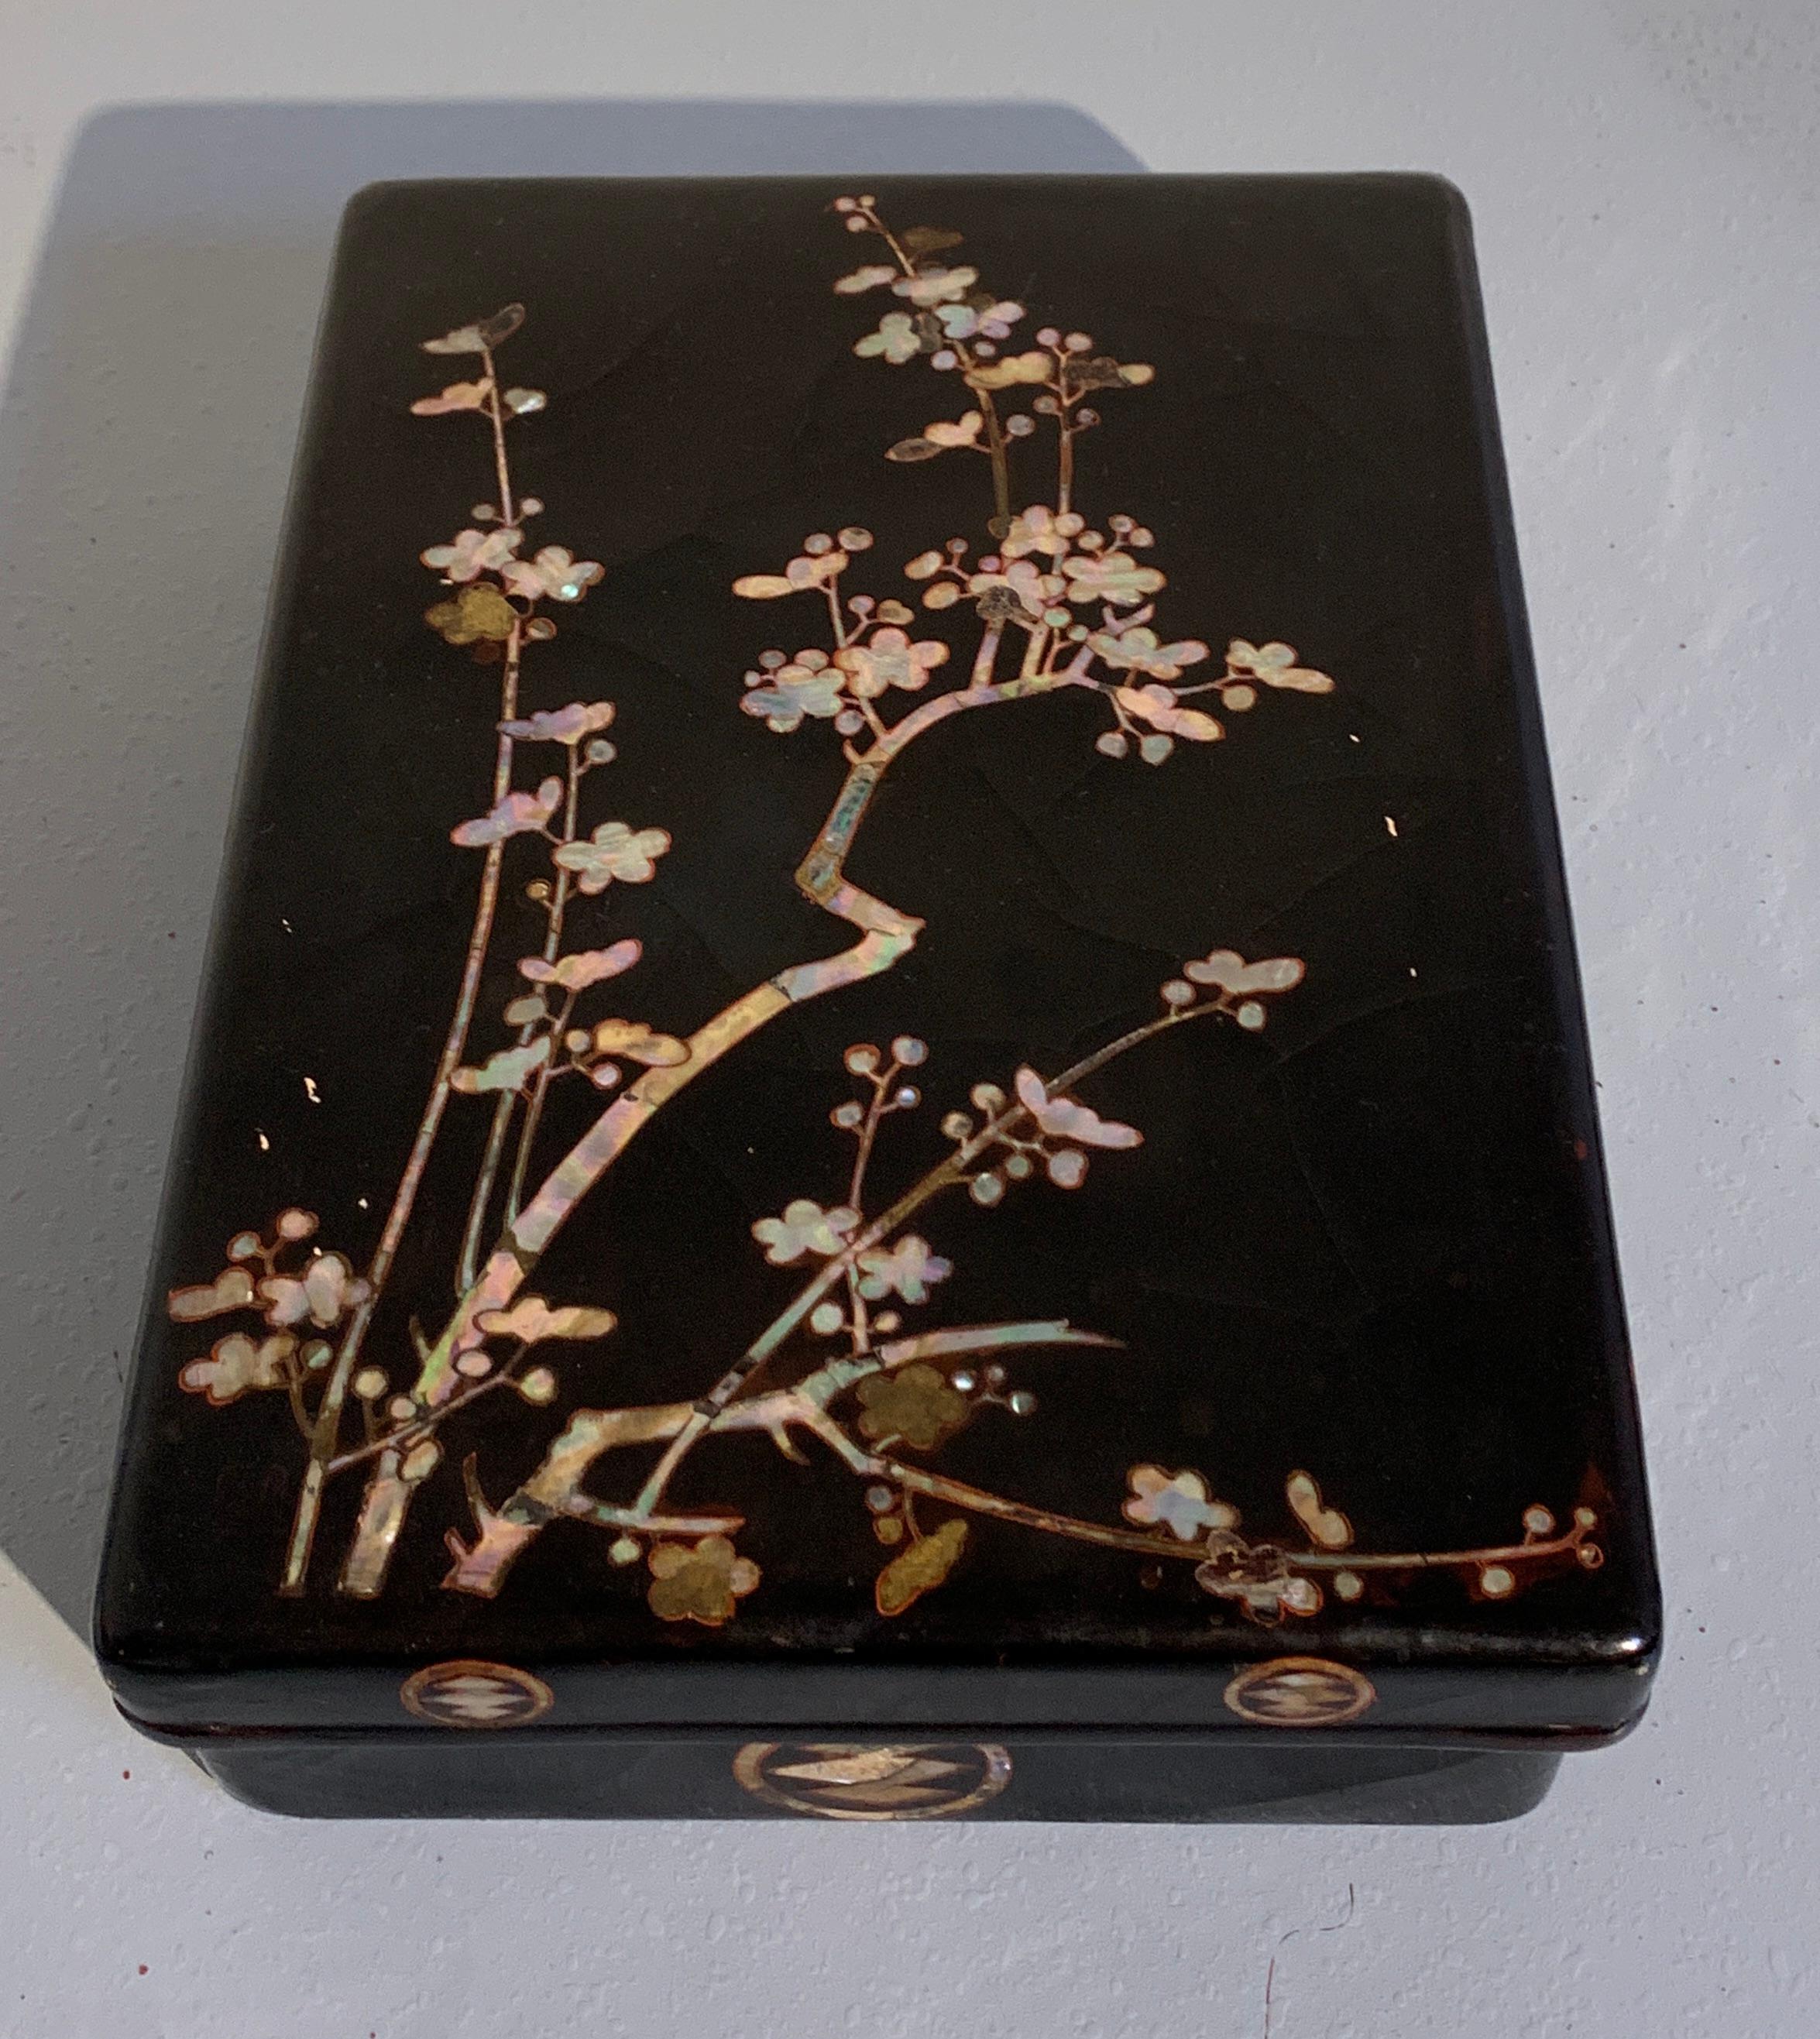 A fine and unusual Japanese black lacquer and mother of pearl inlaid box, Momoyama Period, 16th century, Japan. 

The large box and cover featuring a design of blossoming plum branches rendered in mother of pearl on black lacquer. The interior a